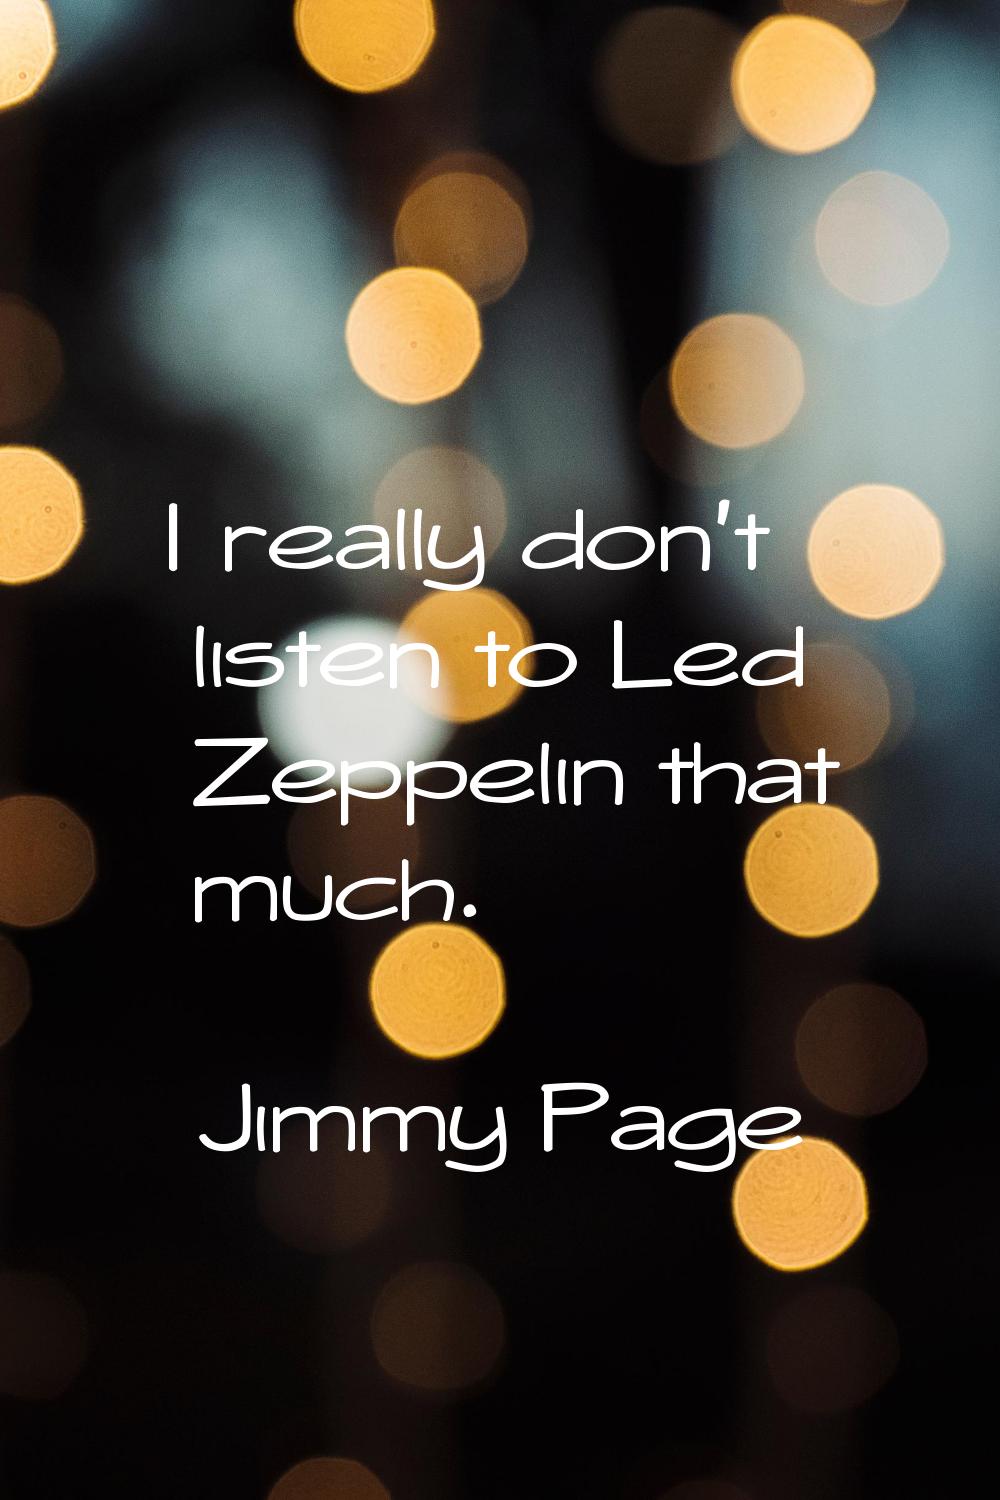 I really don't listen to Led Zeppelin that much.